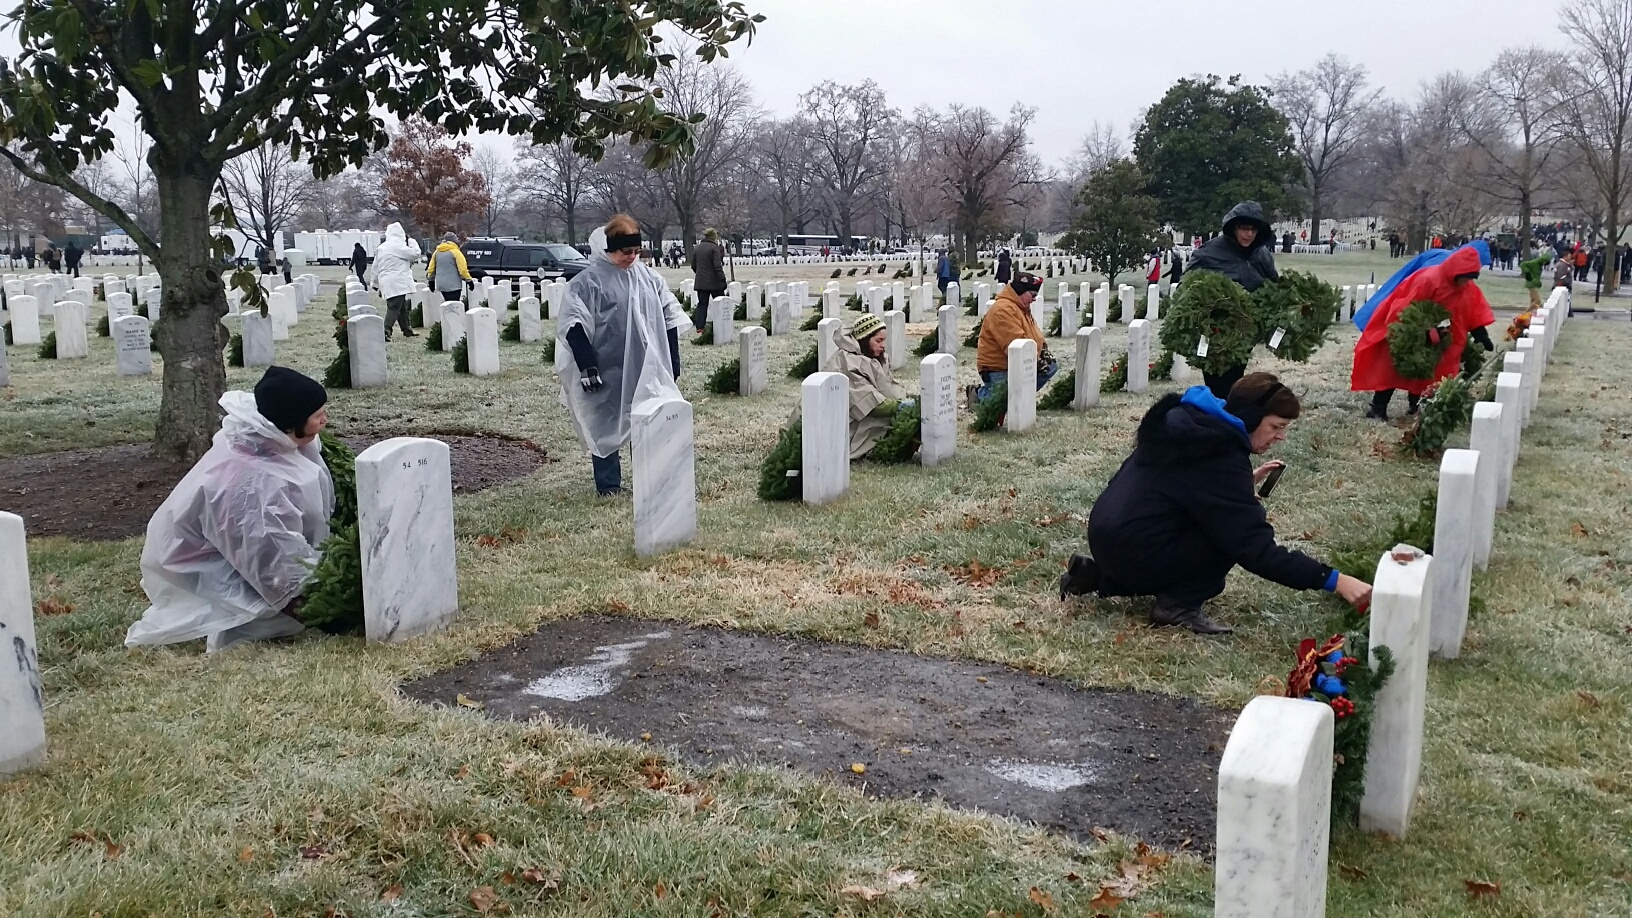 Despite icy road conditions and a winter weather advisory, 44,000 volunteers showed up at Arlington Cemetery to lay wreaths to honor veterans Saturday morning, Dec. 17, 2016. (WTOP Kathy Stewart)